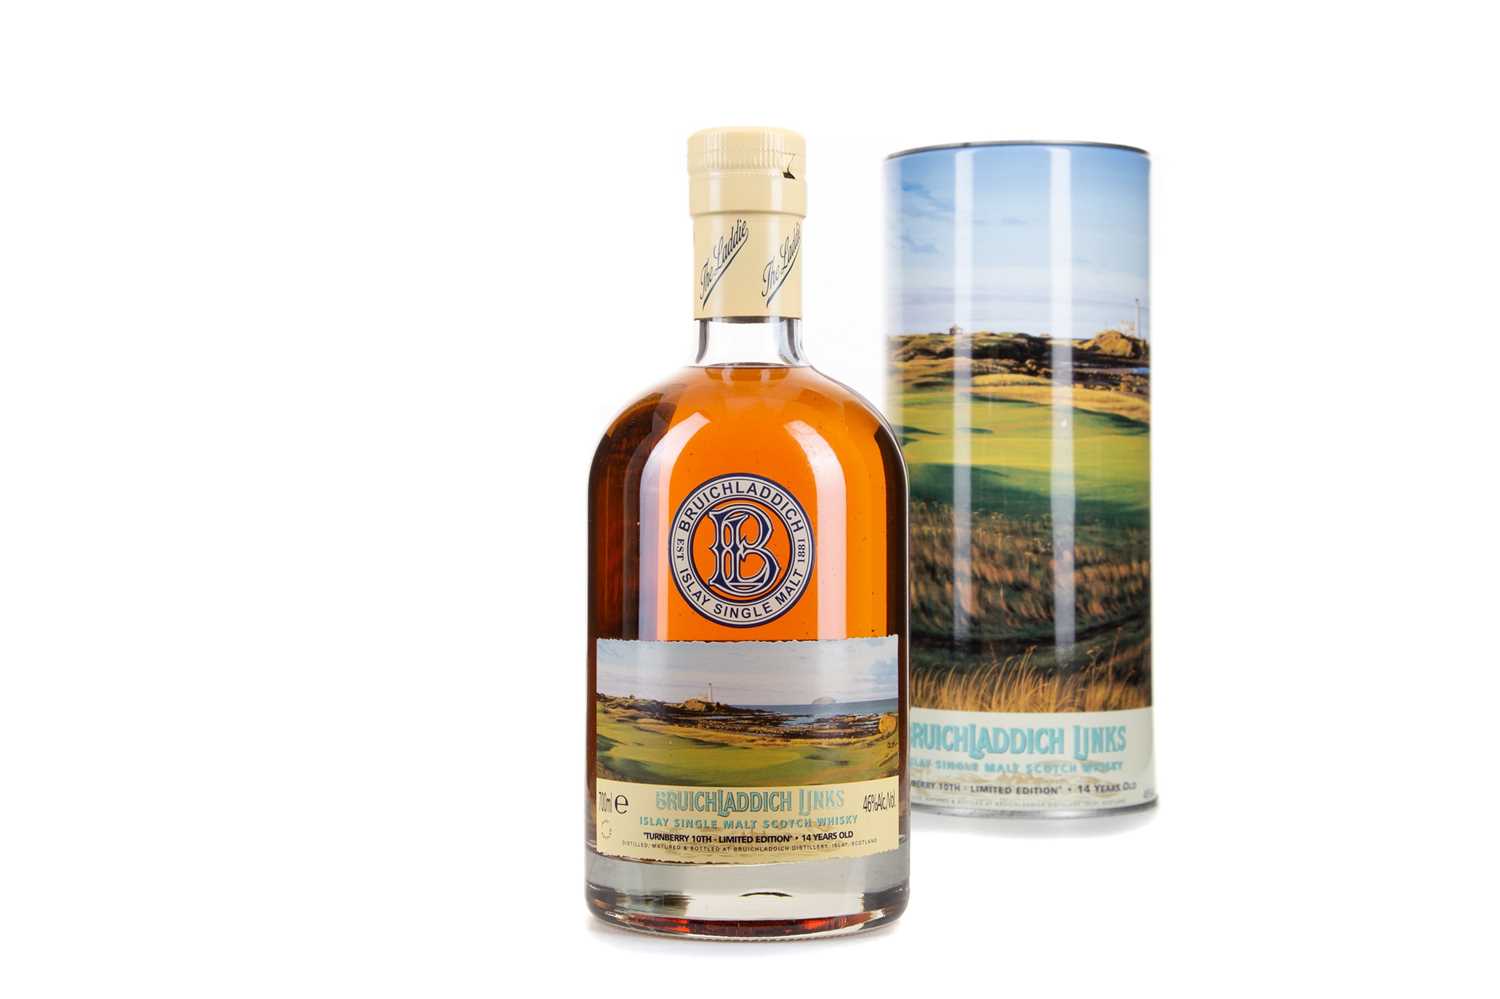 Lot 51 - BRUICHLADDICH LINKS 14 YEAR OLD - TURNBERY 10TH